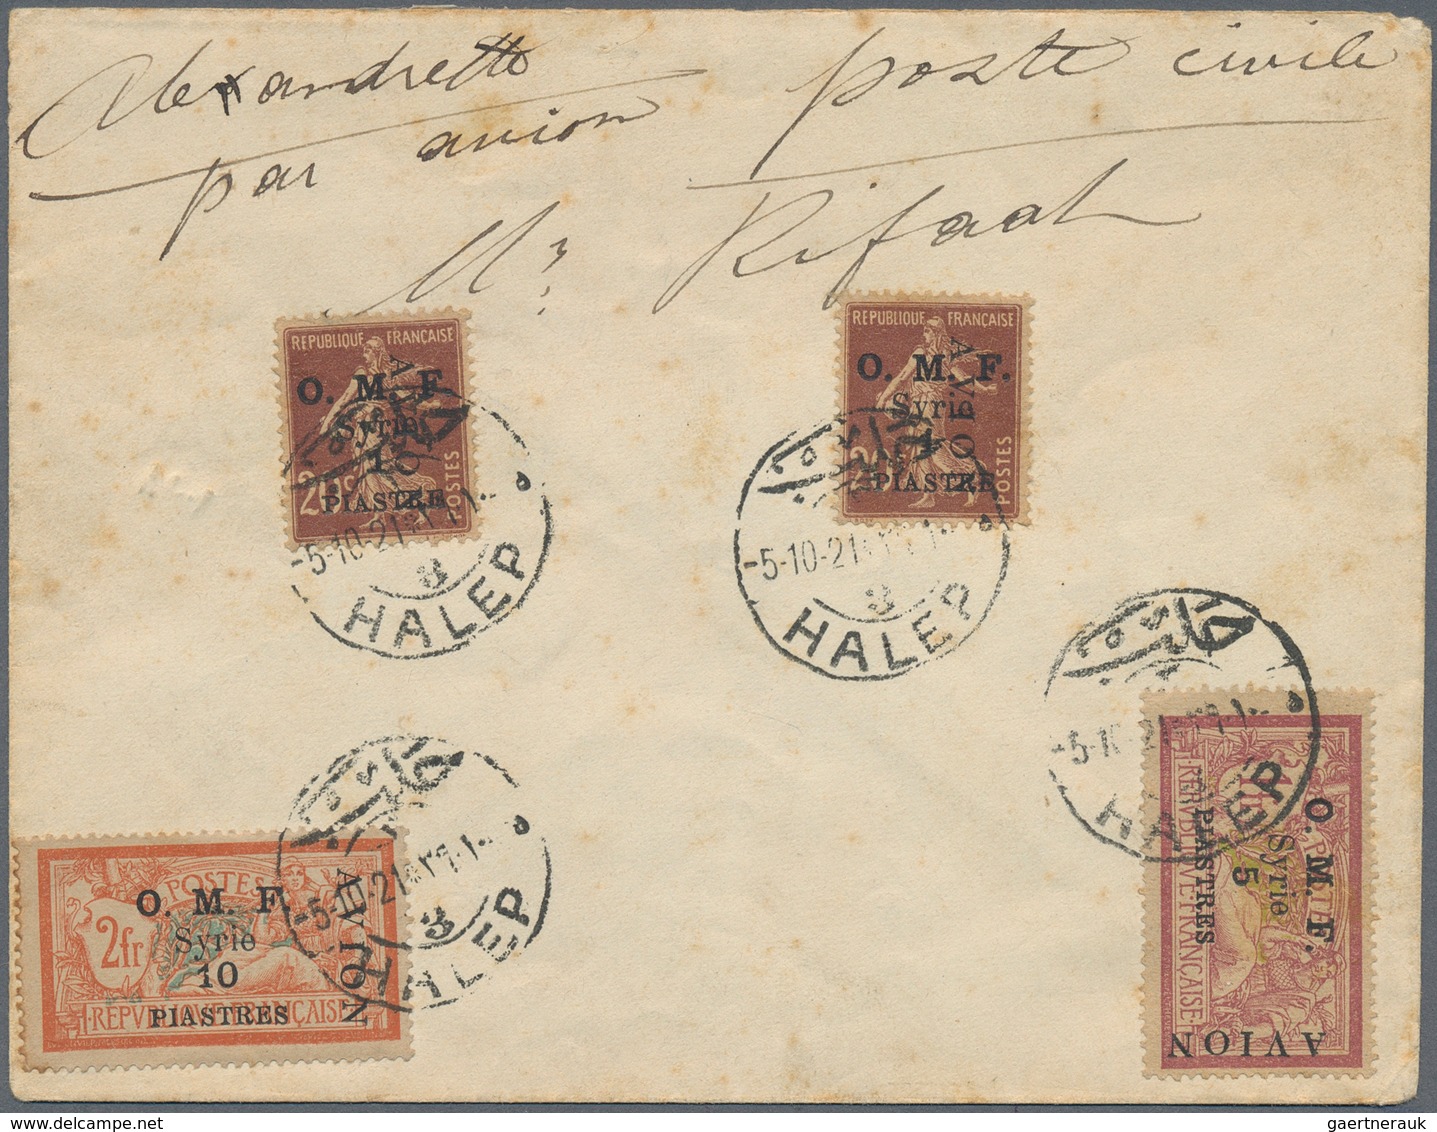 Syrien: 1921, Airmails, Vertical "AVION" Overprints, FIRST DAY COVER (small Faults/min. Toning) Bear - Siria